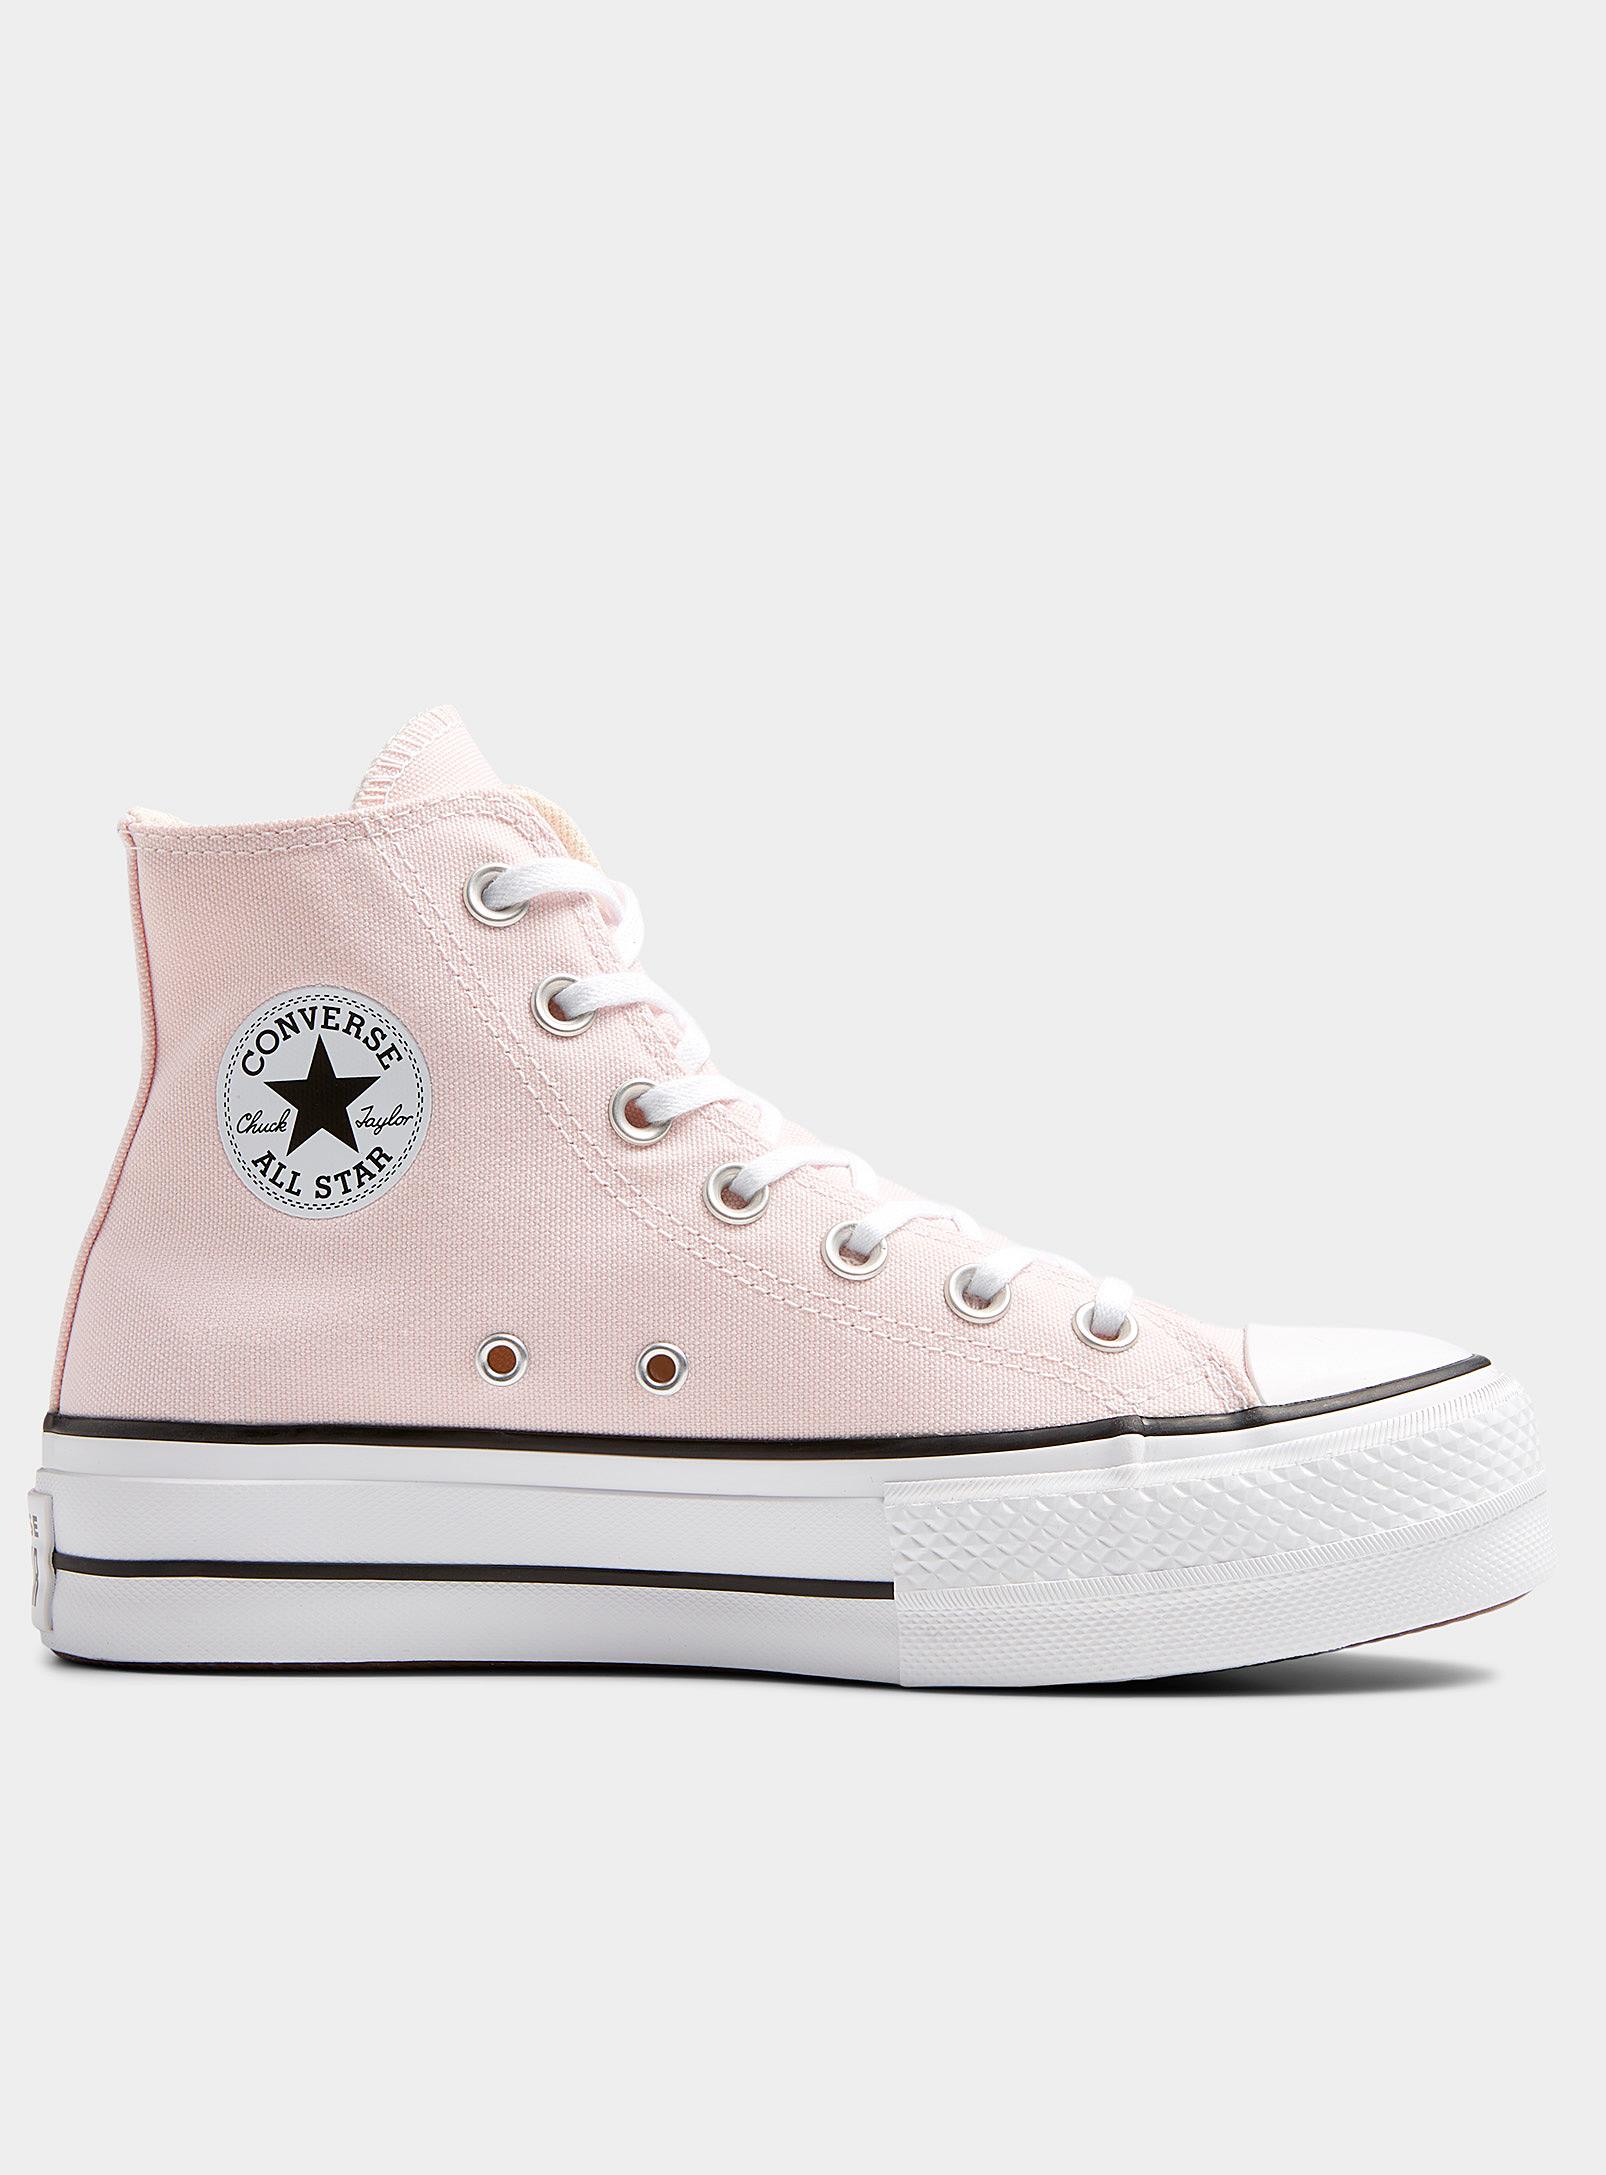 Chuck Taylor All Star Lift High Top Powder Pink Platform Sneakers Women in Natural Lyst